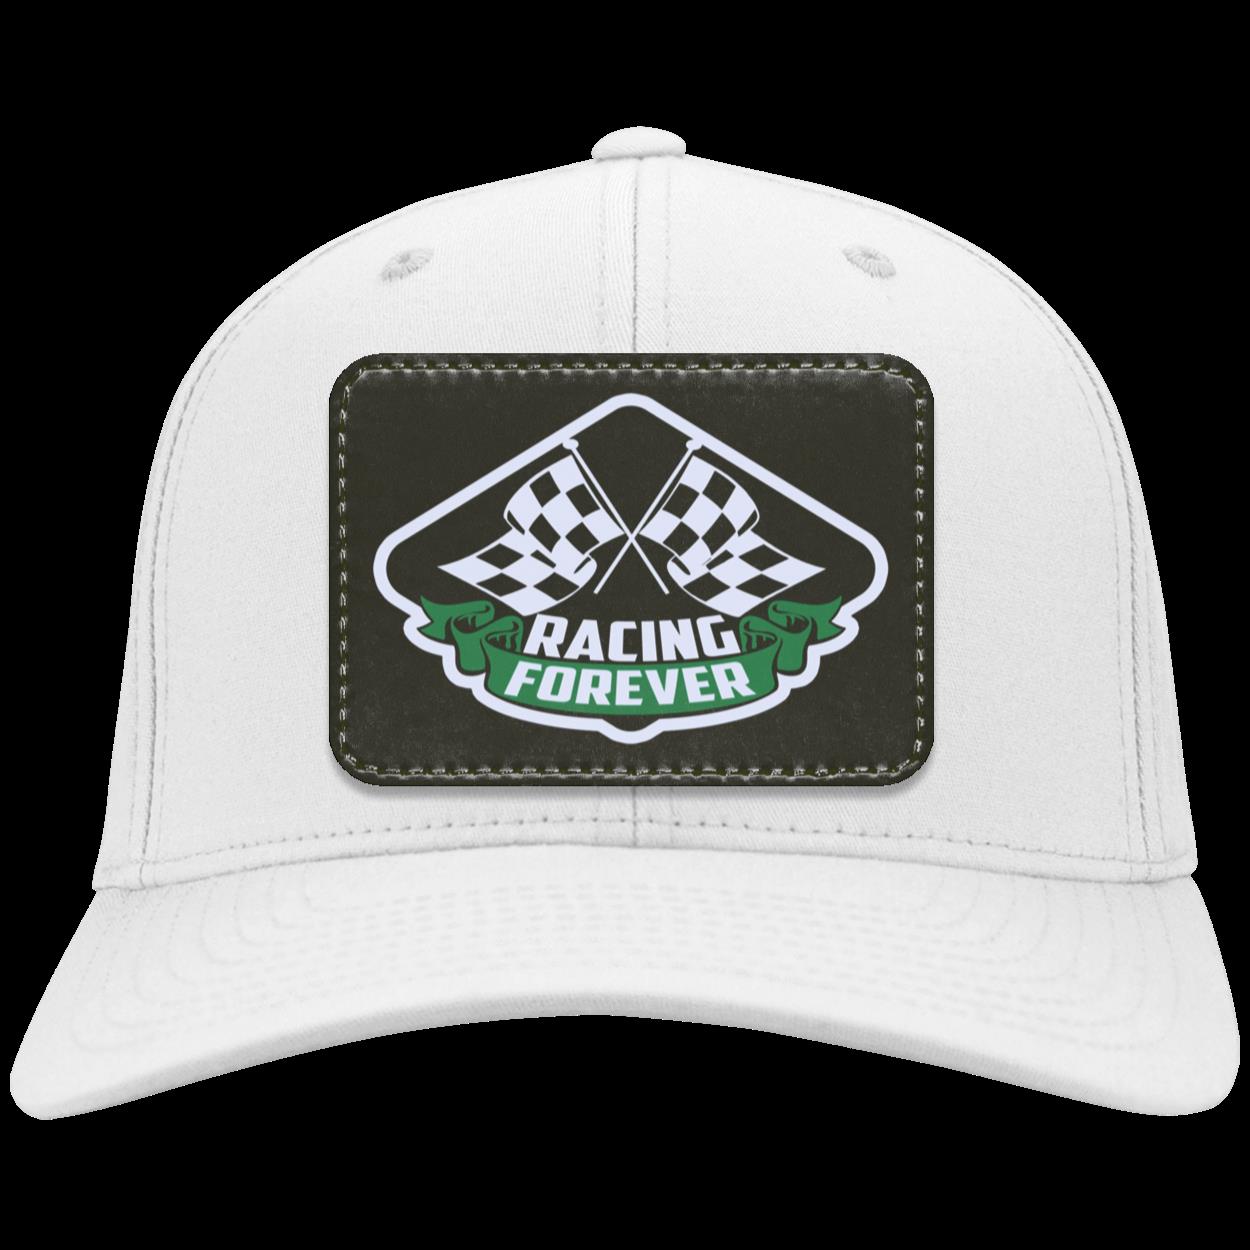 Racing Forever Patched Twill Cap V1